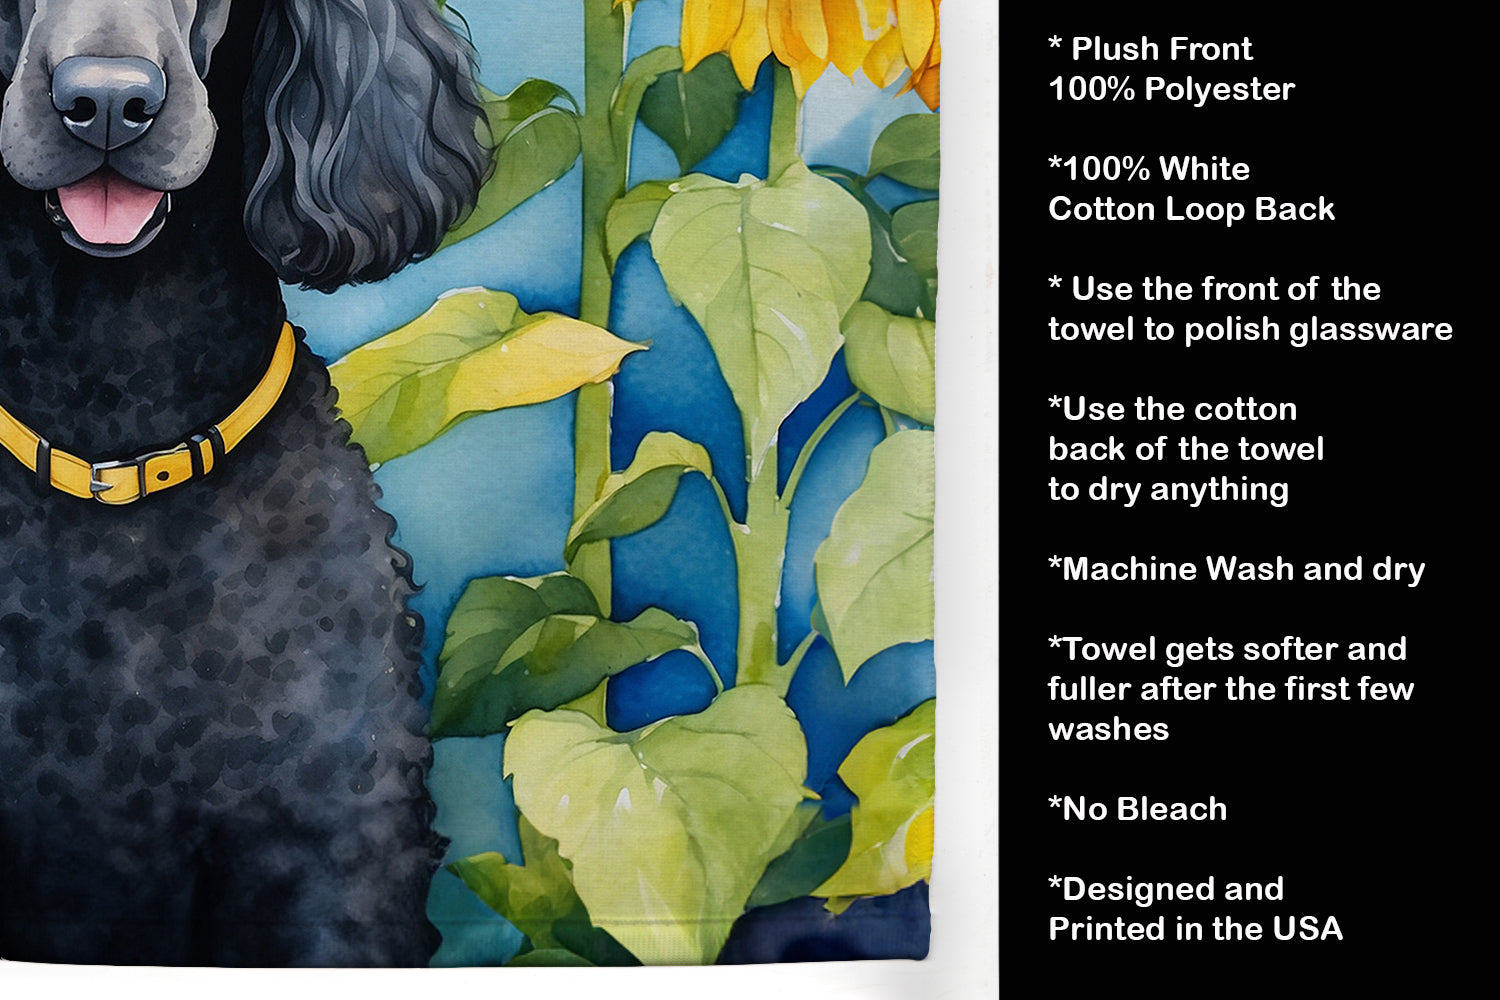 Black Poodle in Sunflowers Kitchen Towel